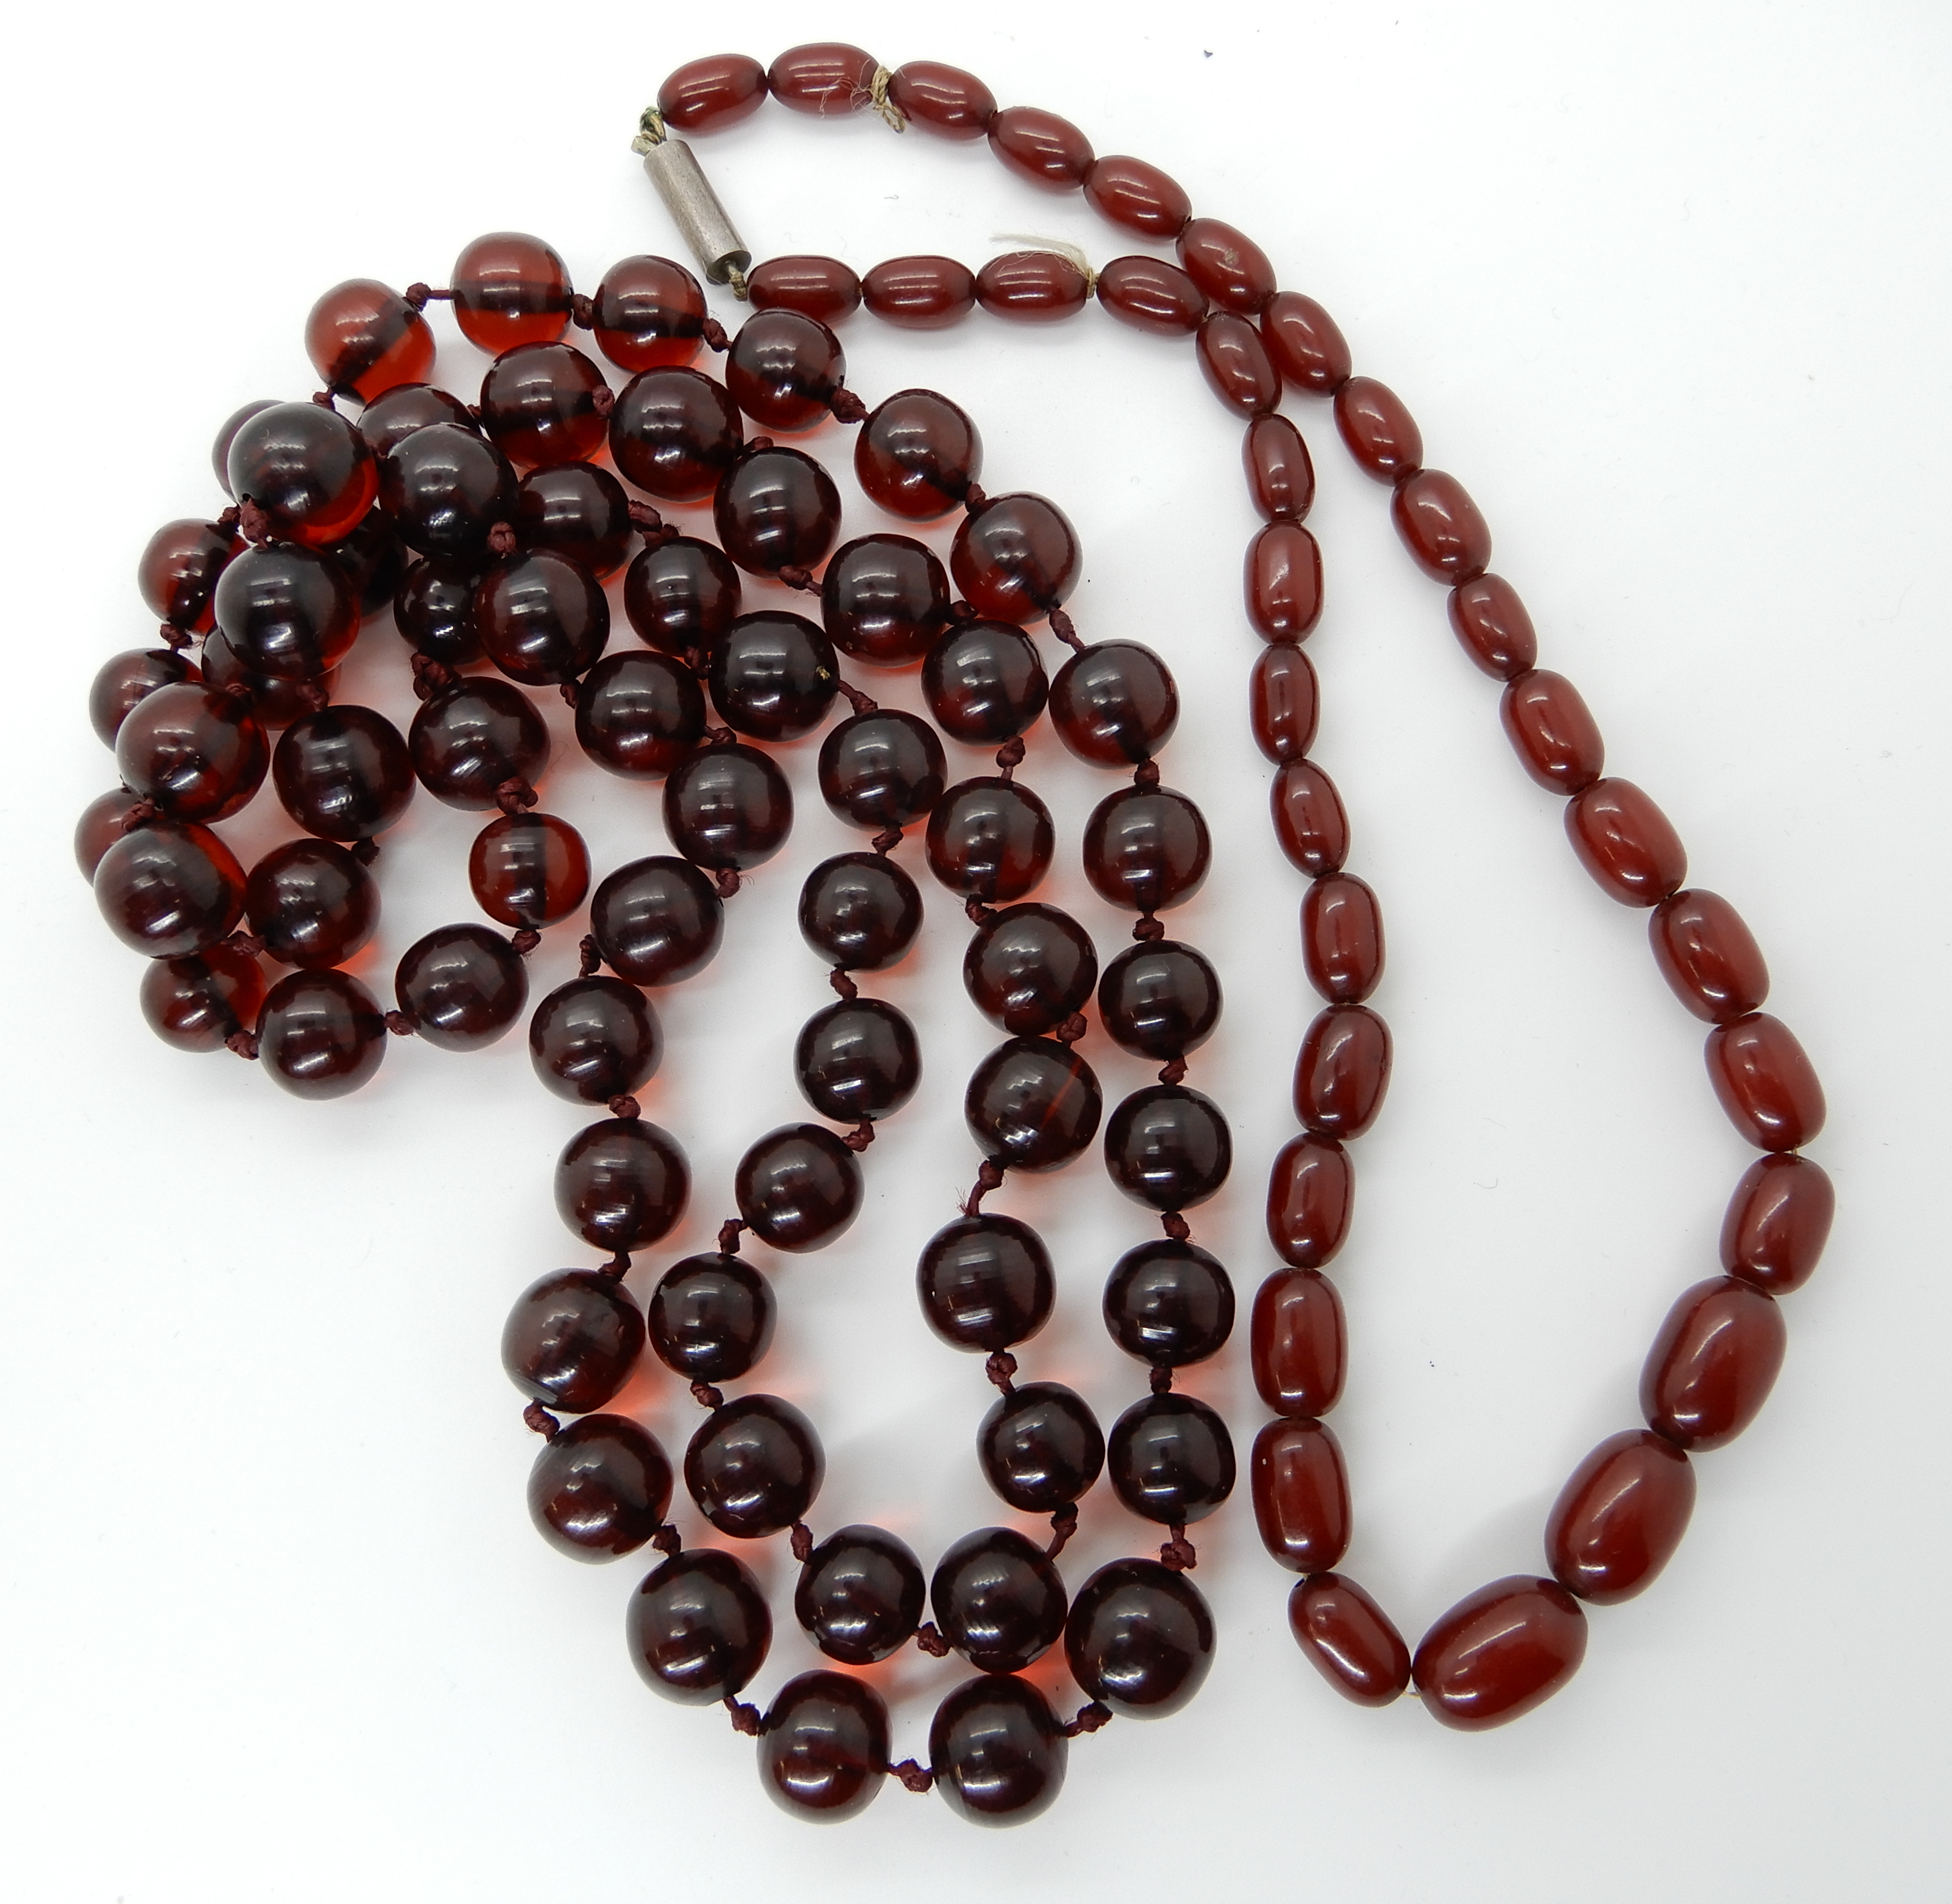 Two strings of cherry amber coloured beads, round beads weight 106.2gms, oval beads weight 25.5gms